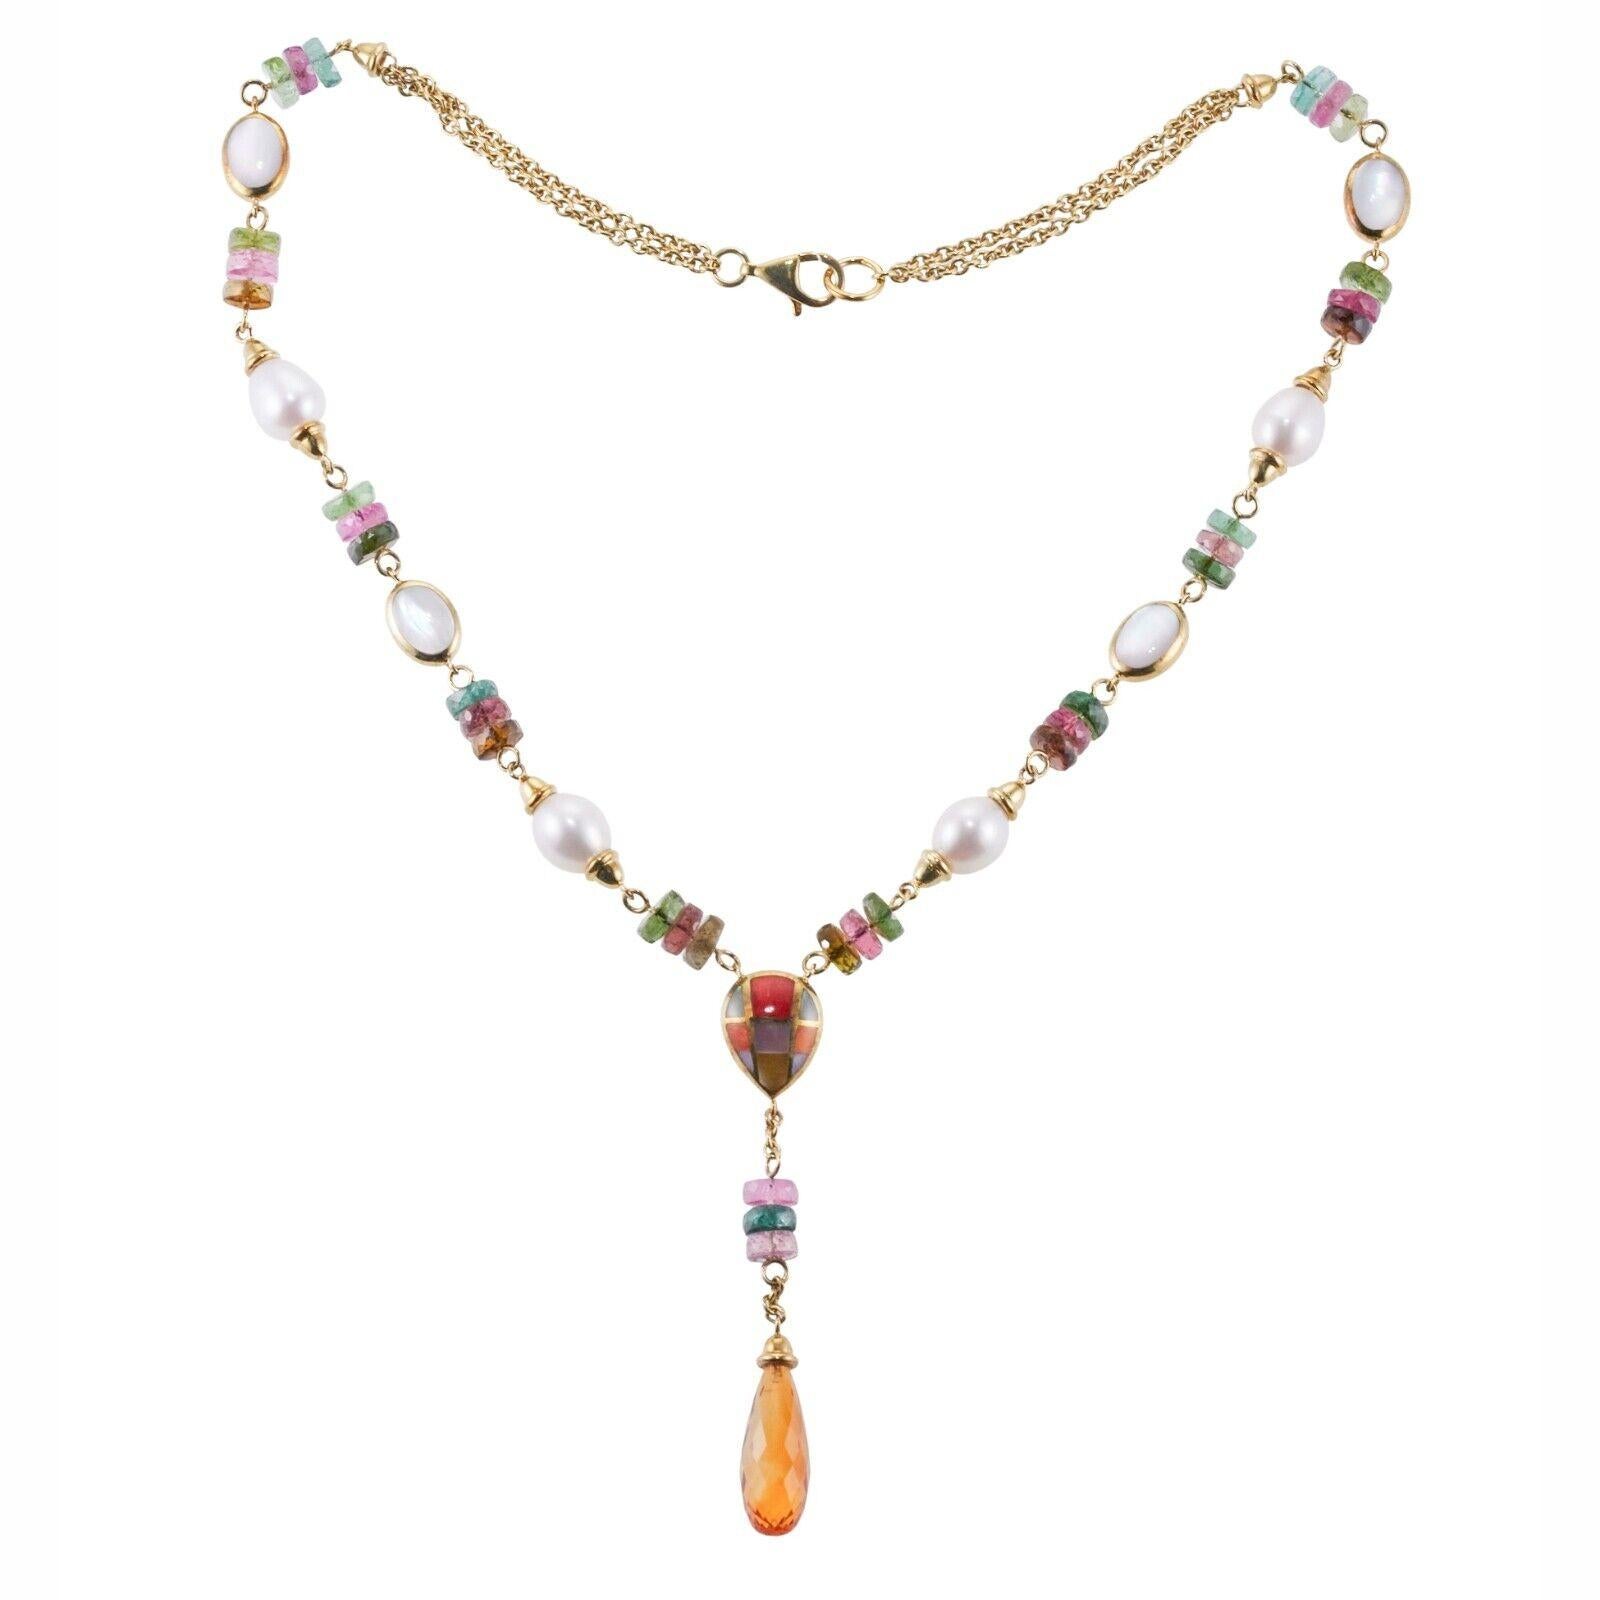 A 14k yellow gold necklace set with mother-of-pearl, coral, purple sugilite, tourmaline, citrine and pearls. Necklace- 16.5